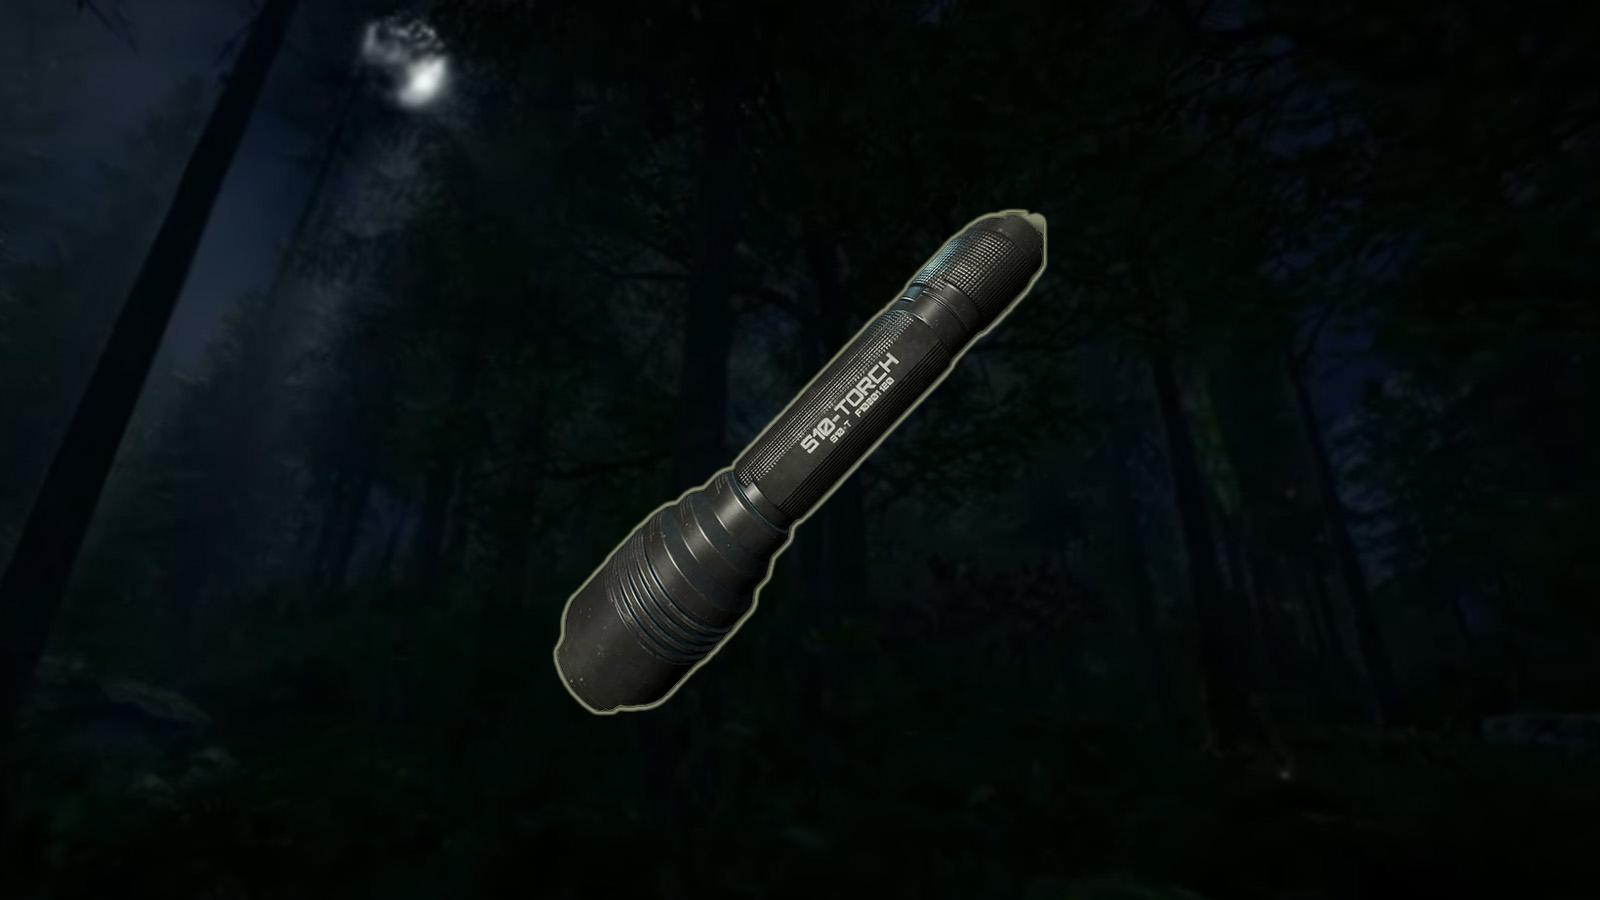 The Flashlight from Sons of the Forest with the game's night time terrain behind